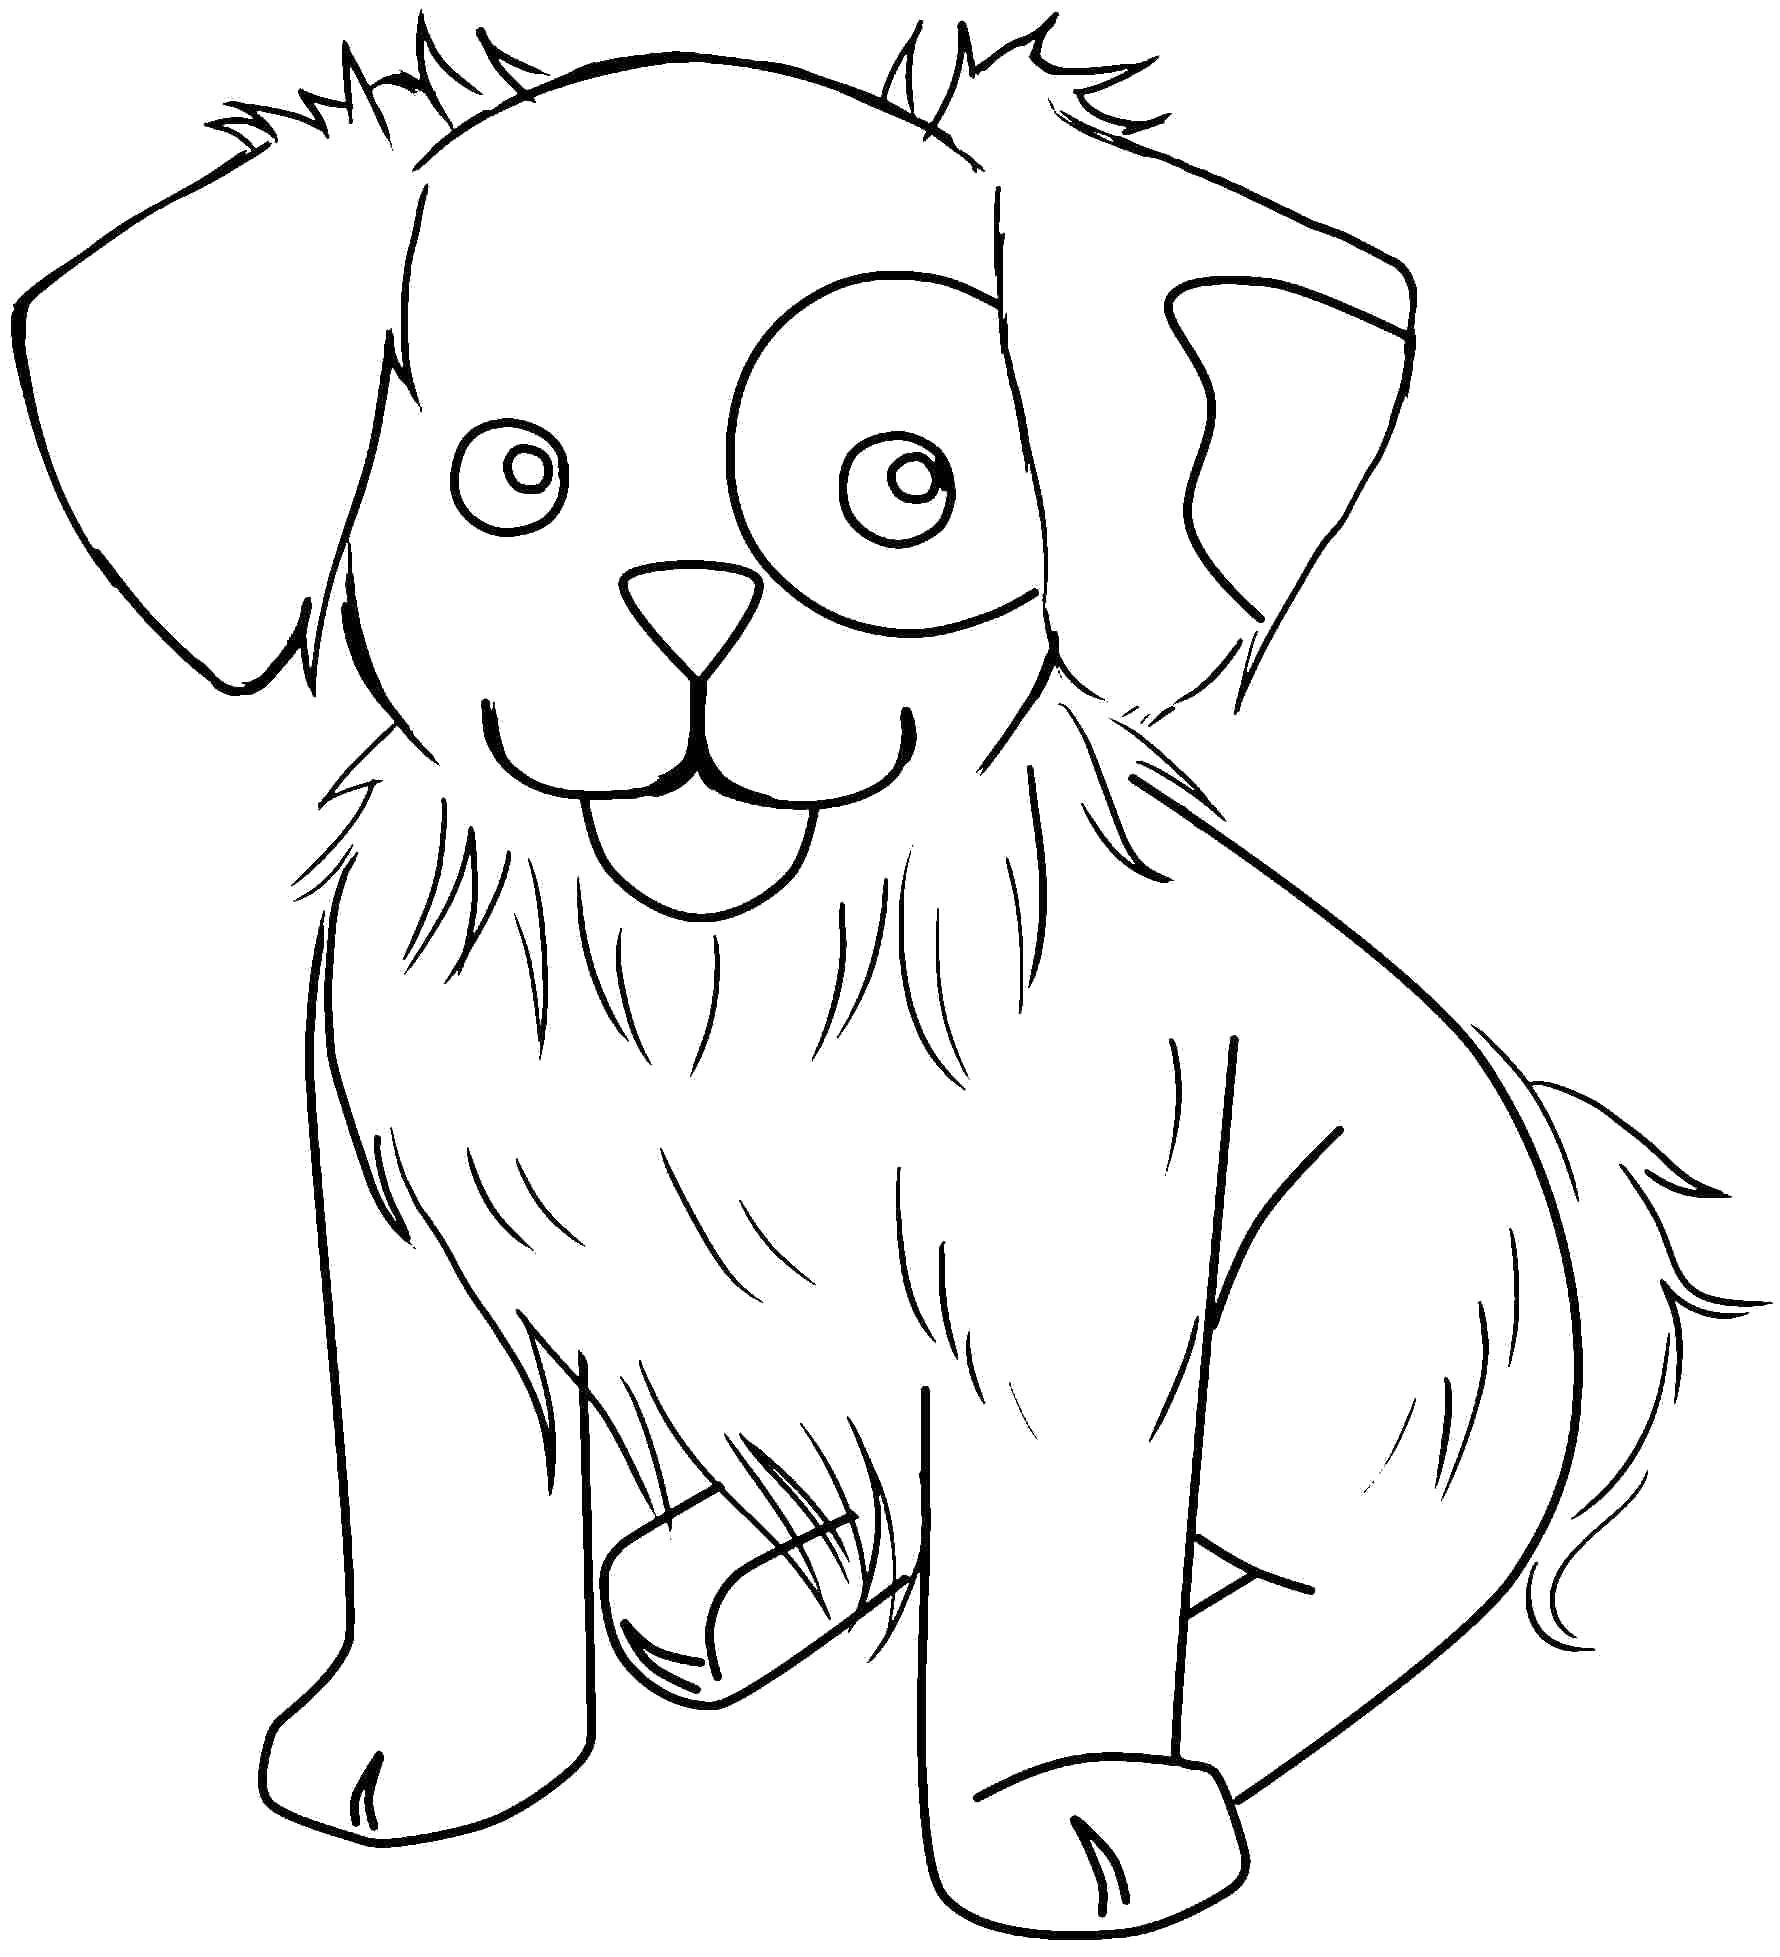 Coloring Little puppy dog with spot on eye. Category animals. Tags:  Animals, dog, puppy.